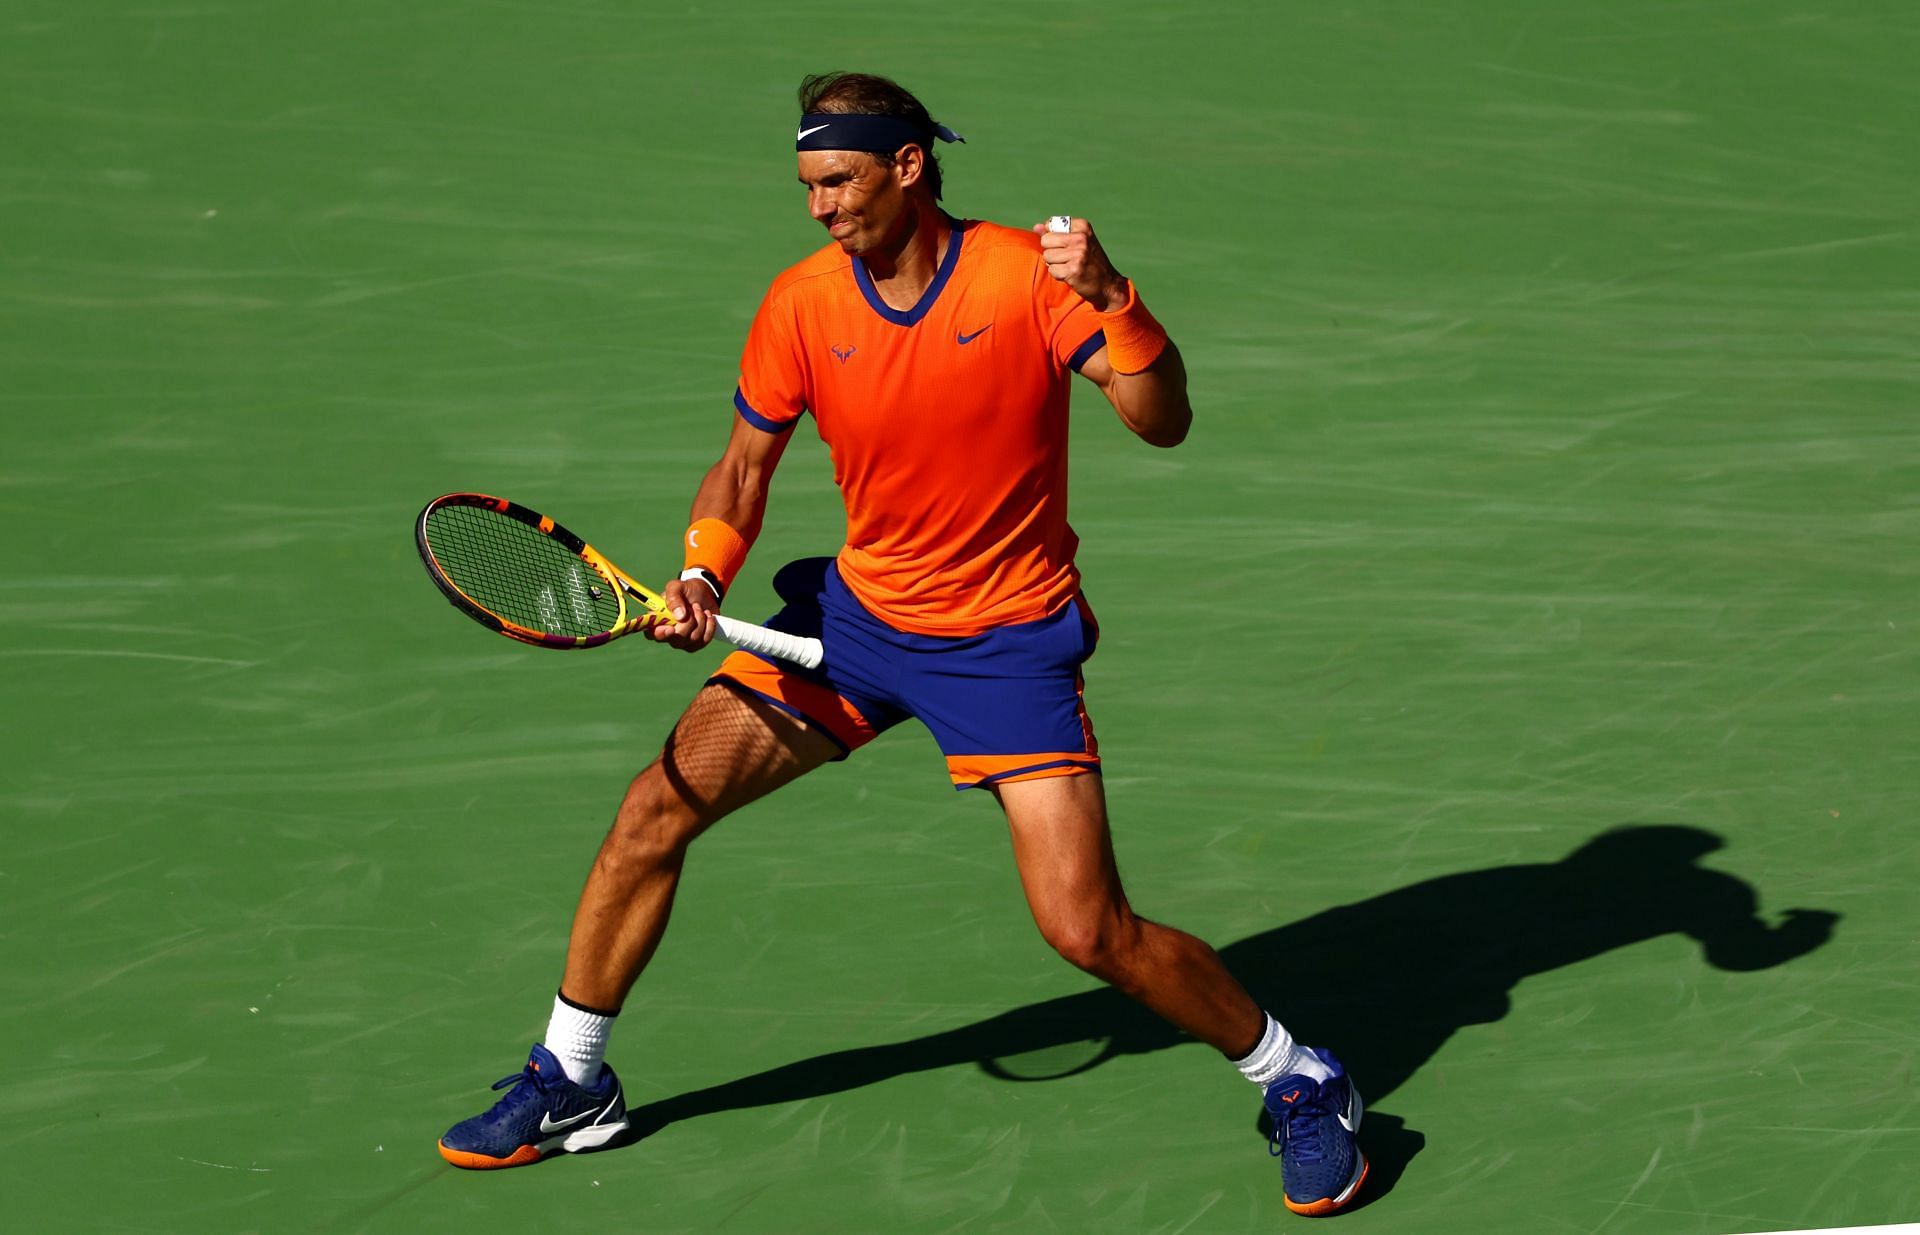 Rafael Nadal celebrates a point against Reilly Opelka at the BNP Paribas Open